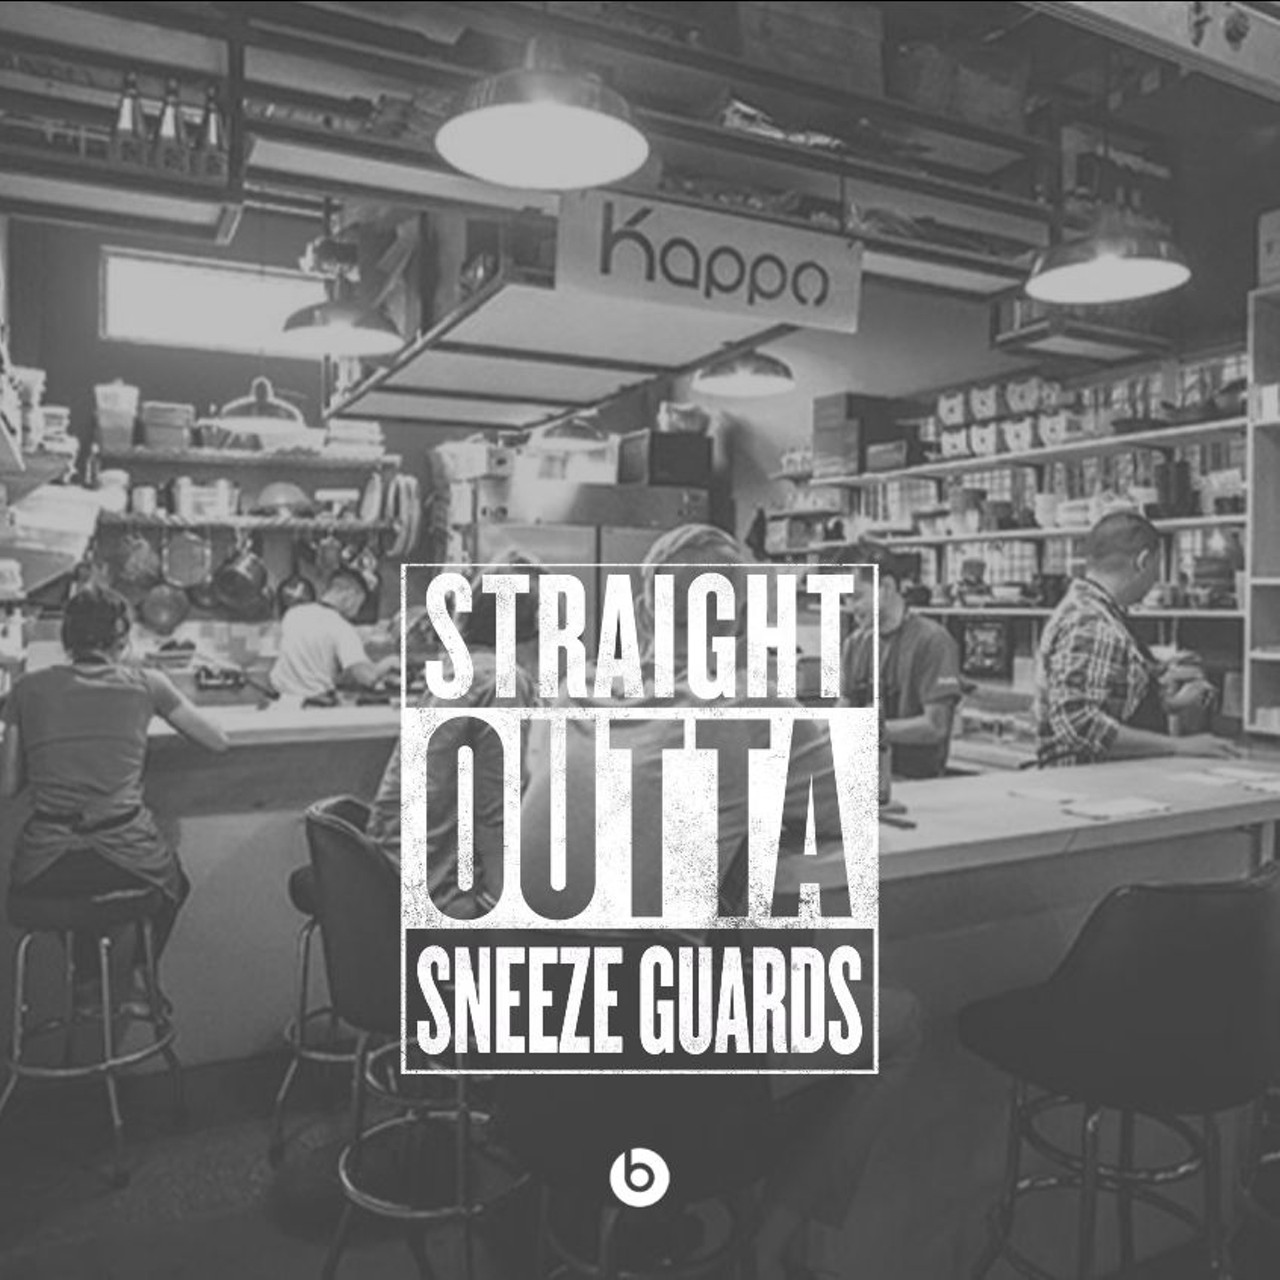 The 21 best Orlando-based "Straight Outta" memes